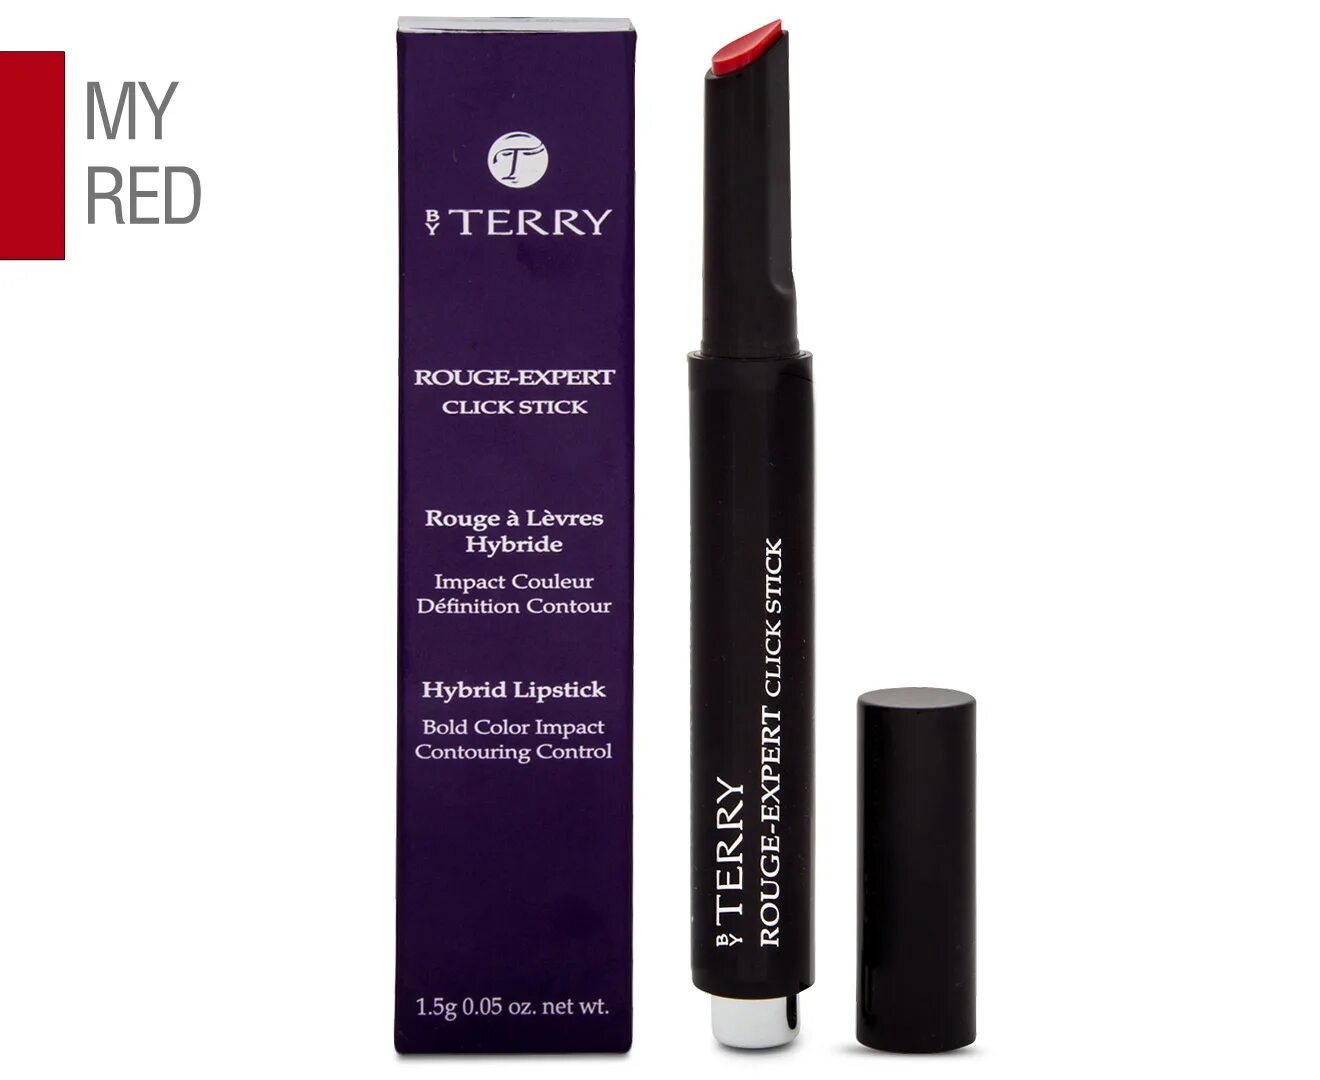 By Terry rouge-Expert. By Terry rouge Expert click Stick Lipstick. By Terry Lip Stick Lipstick rouge. By Terry помада. Hybrid stick